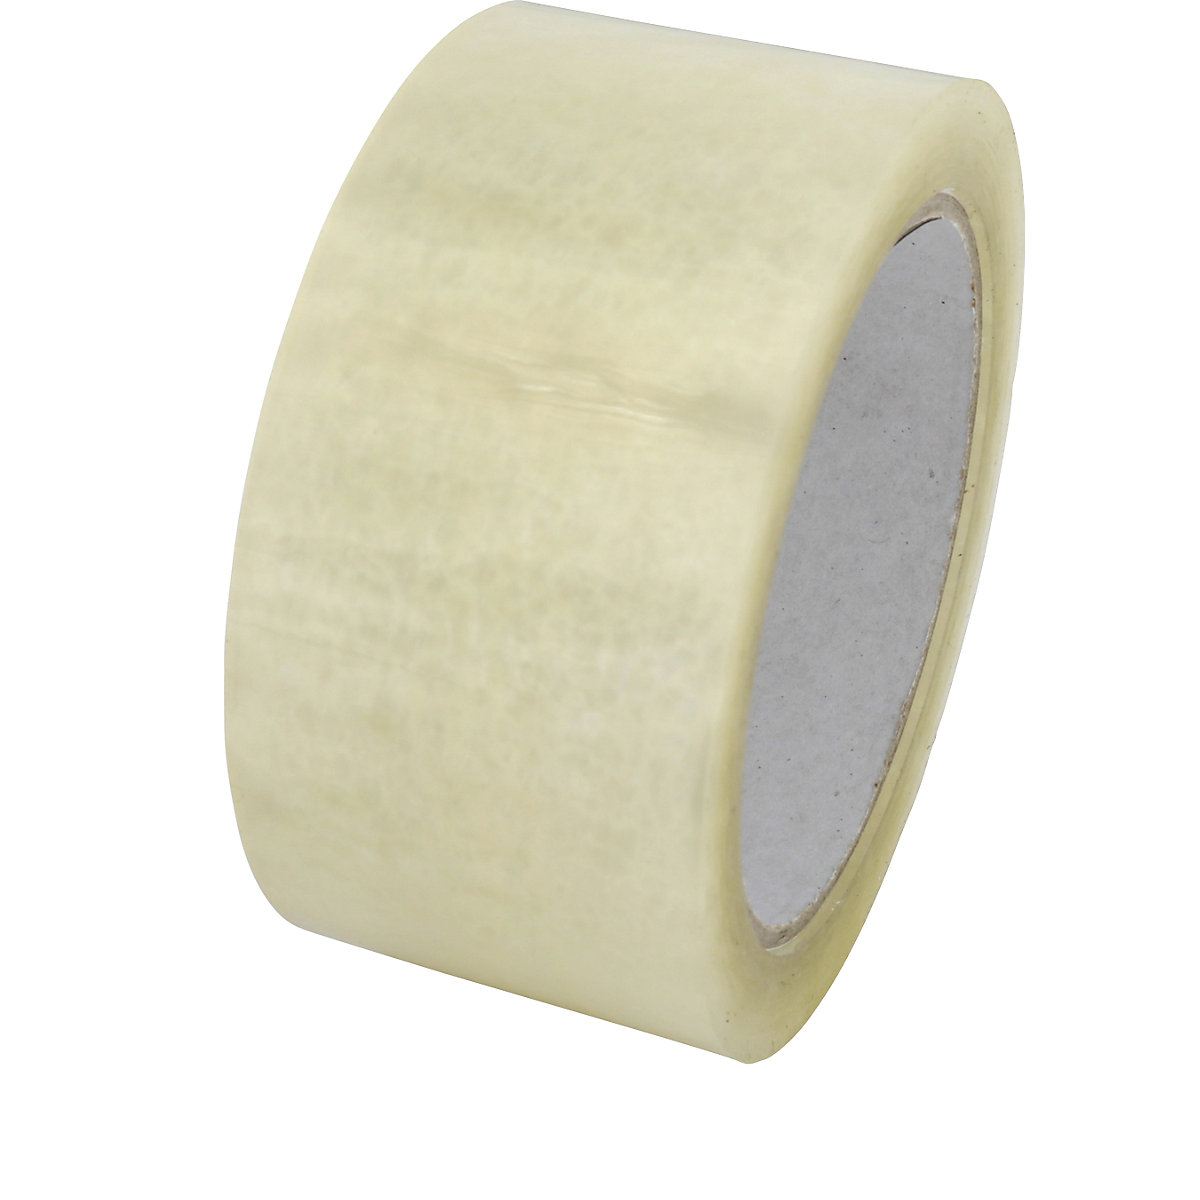 PP packing tape, quiet and extra strong model, pack of 36 rolls, transparent, tape width 50 mm-5